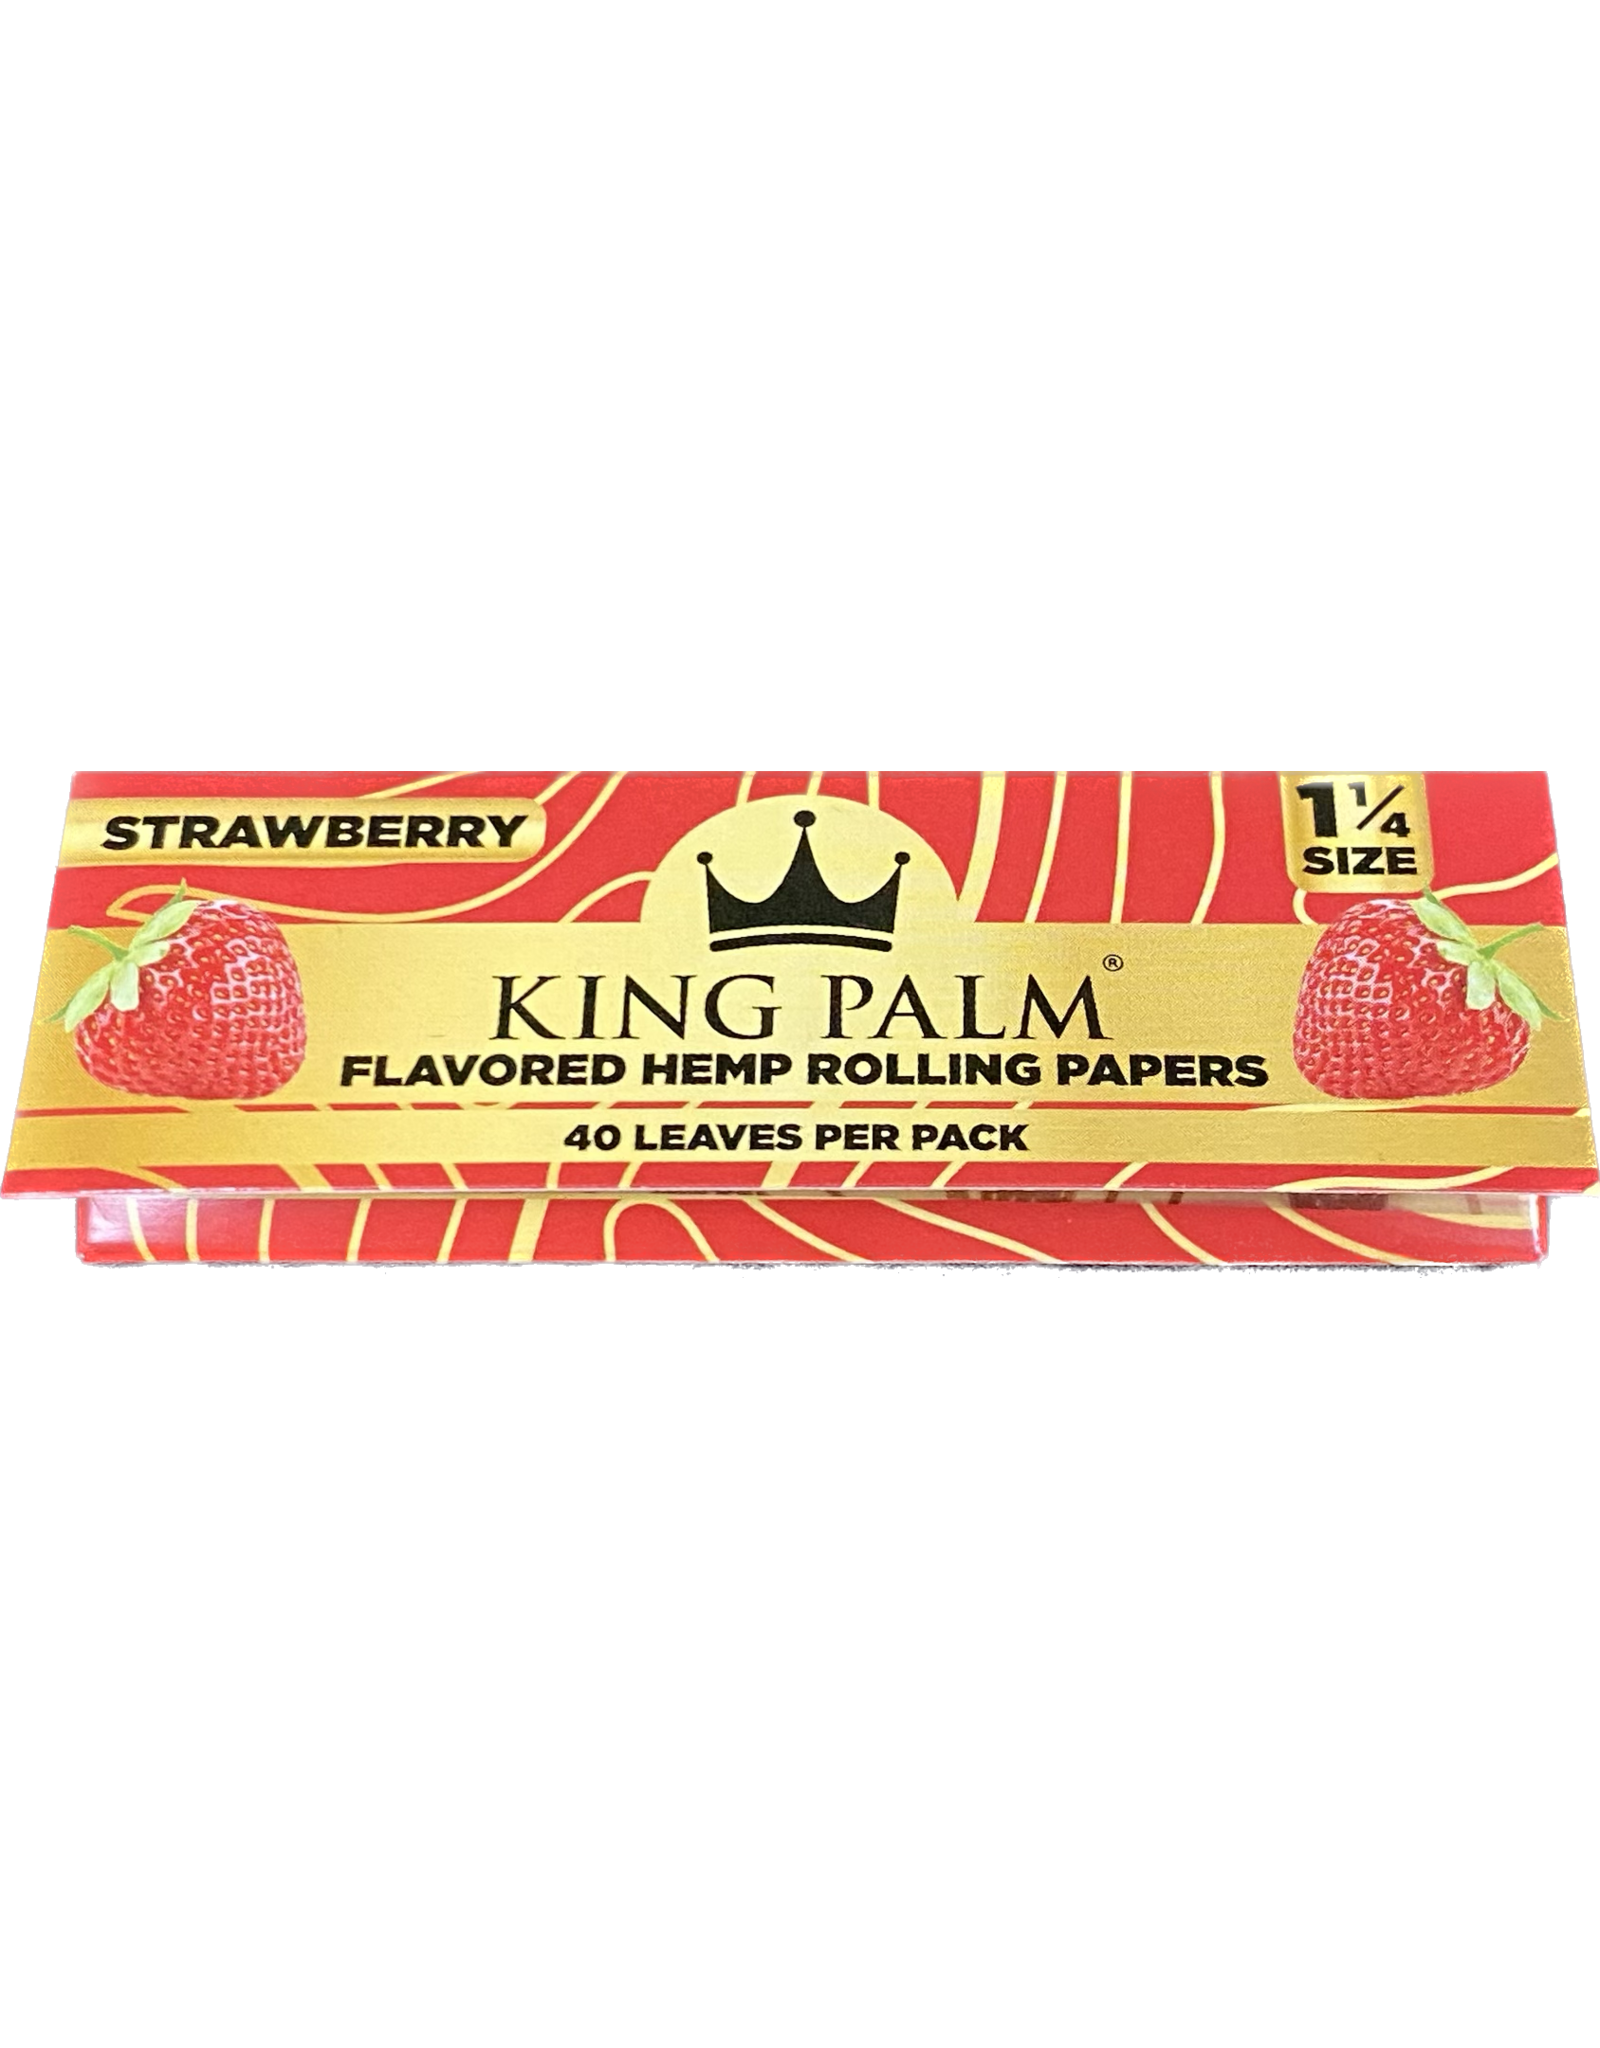 King Palm King Palm Flavored Hemp 1.25 Papers - Strawberry